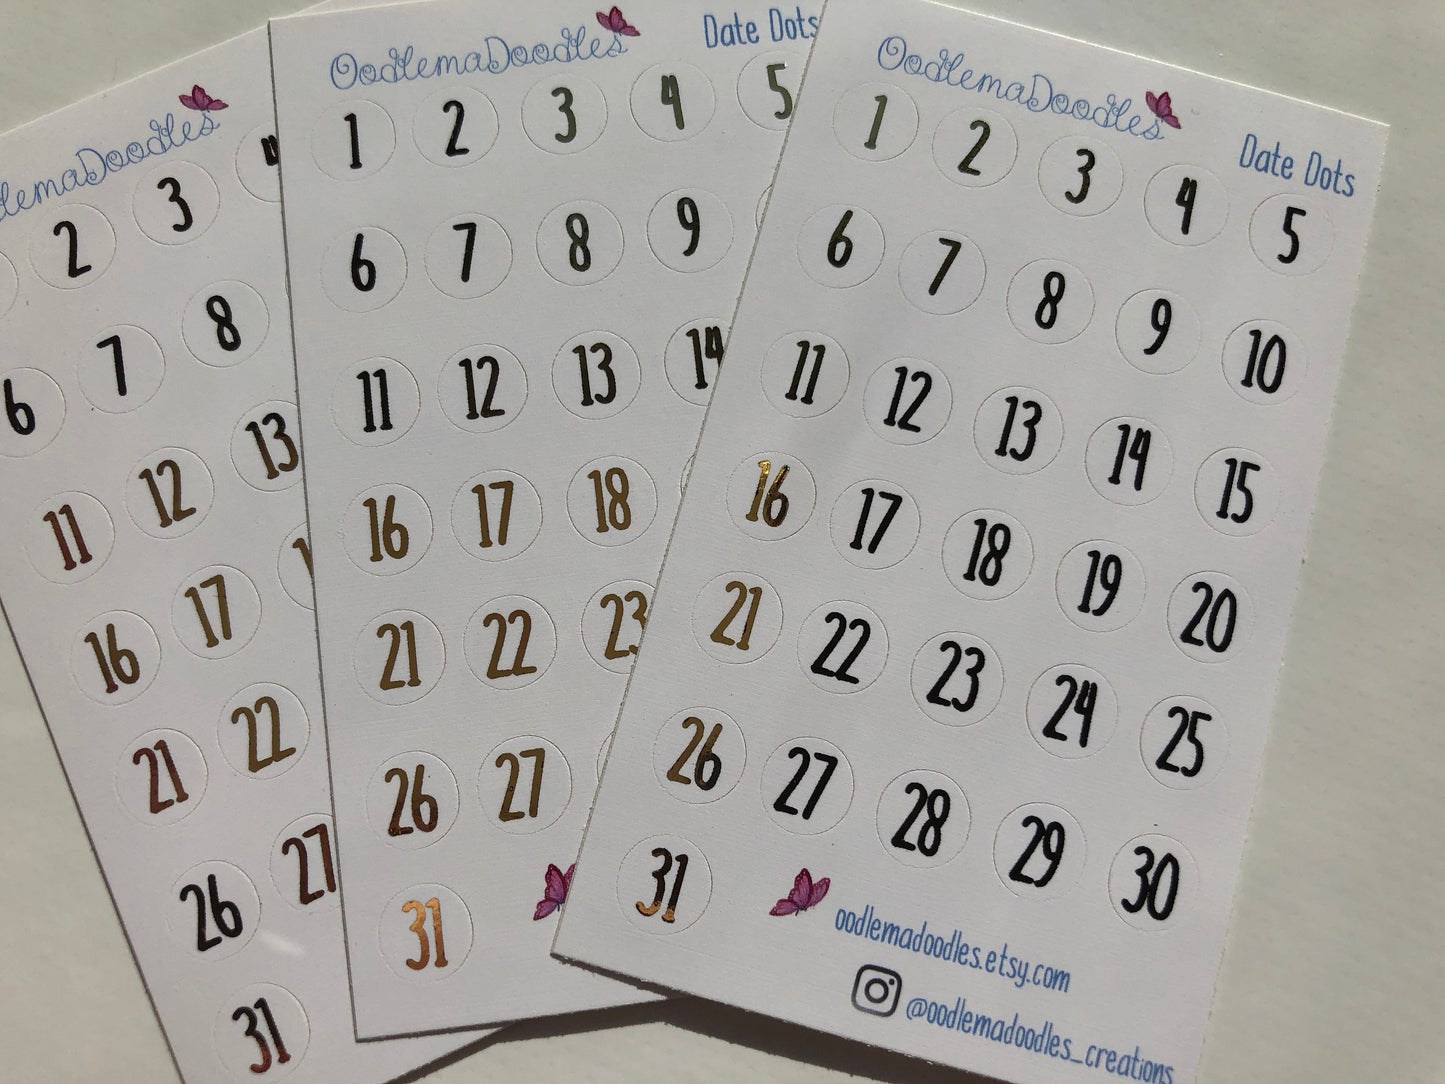 TRANSPARENT Foiled Date Dot Stickers